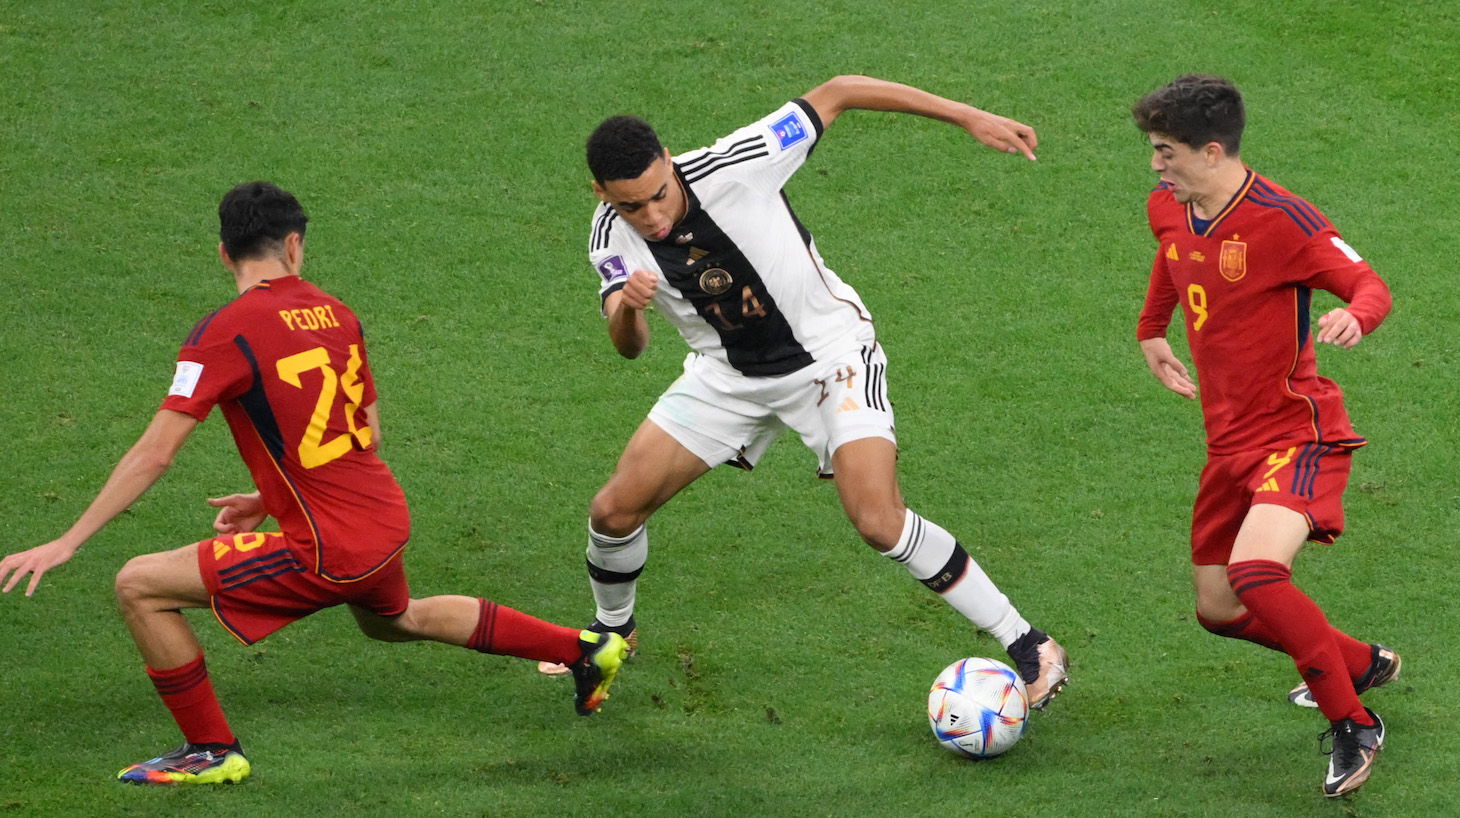 Germany's midfielder #14 Jamal Musiala is challenged by Spain's midfielder #26 Pedri and Spain's midfielder #09 Gavi during the Qatar 2022 World Cup Group E football match between Spain and Germany at the Al-Bayt Stadium in Al Khor, north of Doha on November 27, 2022.